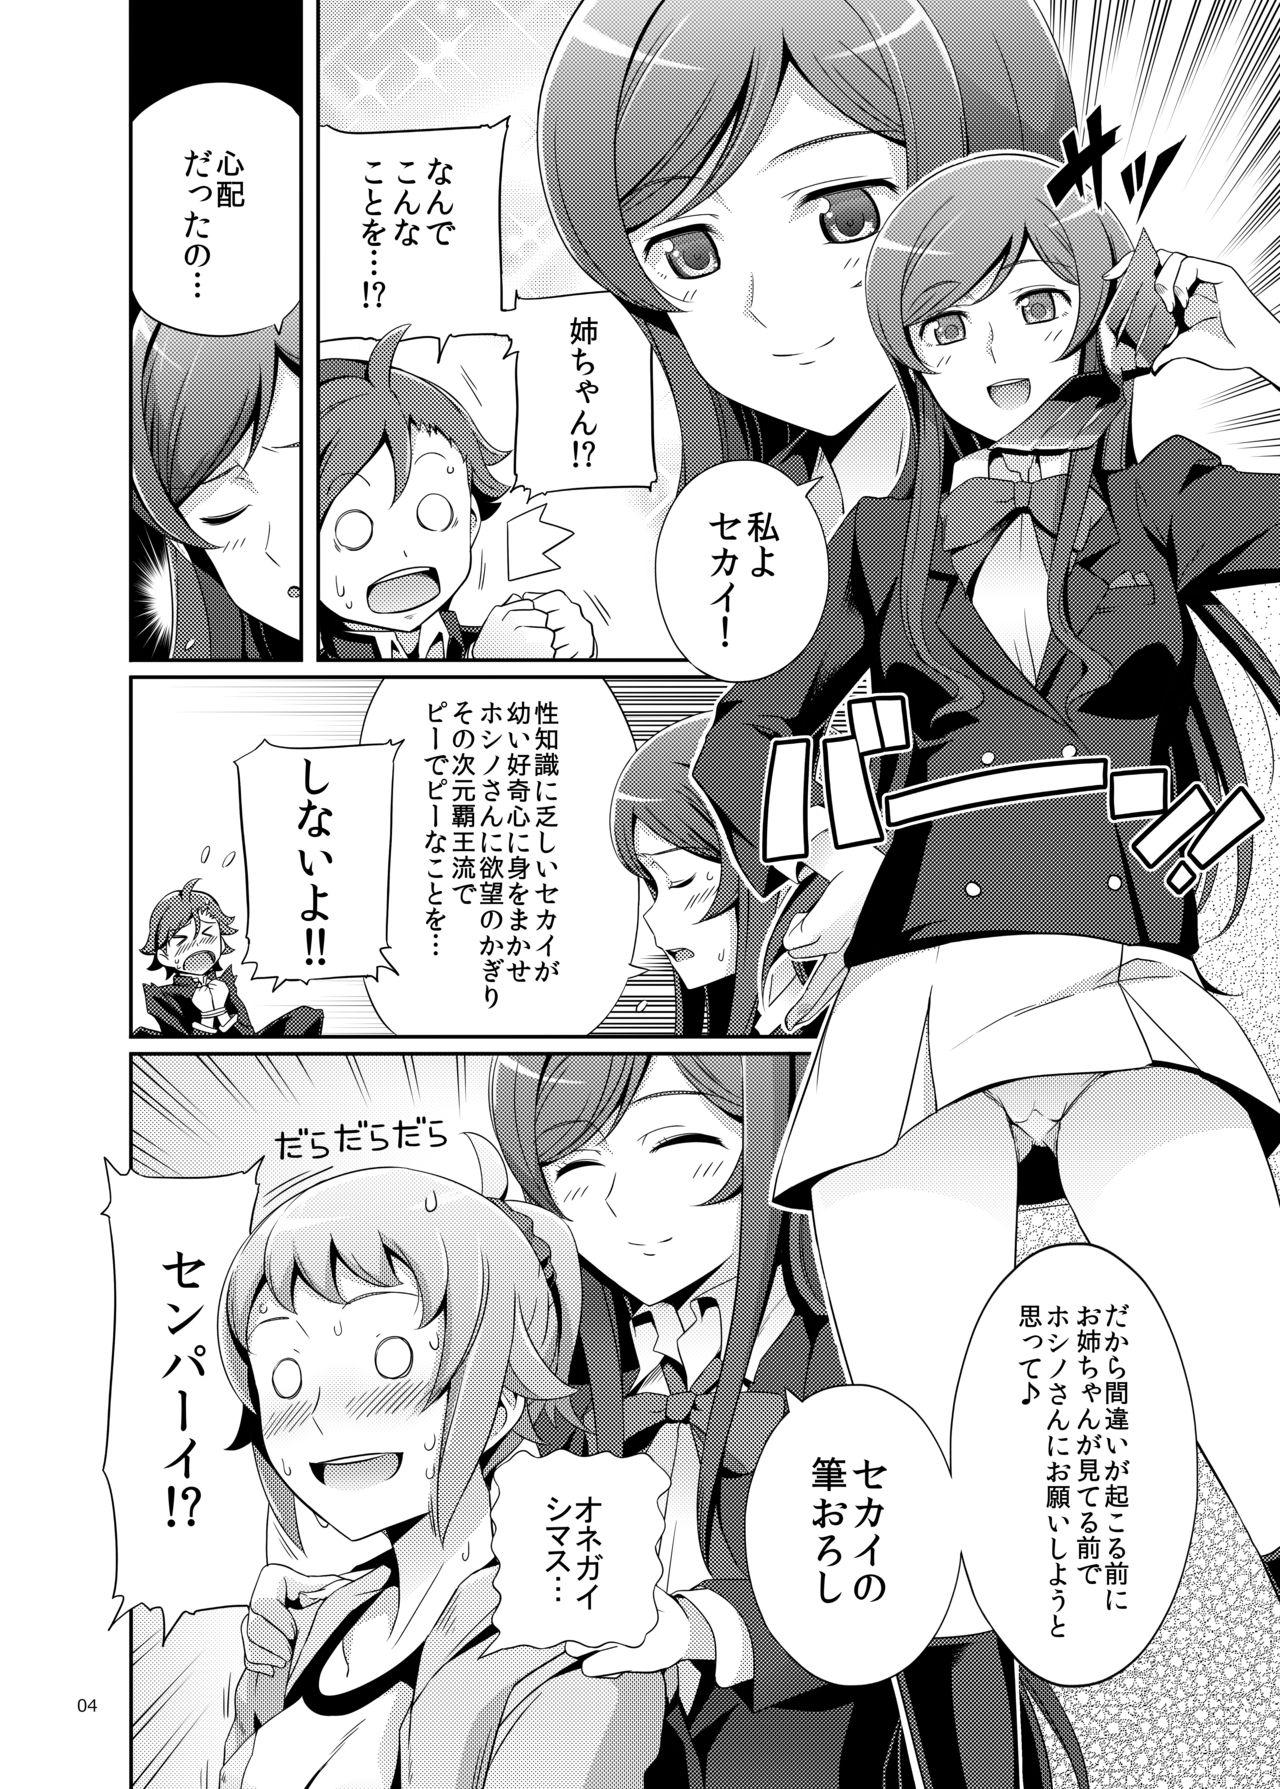 Best Namahame Try! - Gundam build fighters Gundam build fighters try Raw - Page 3